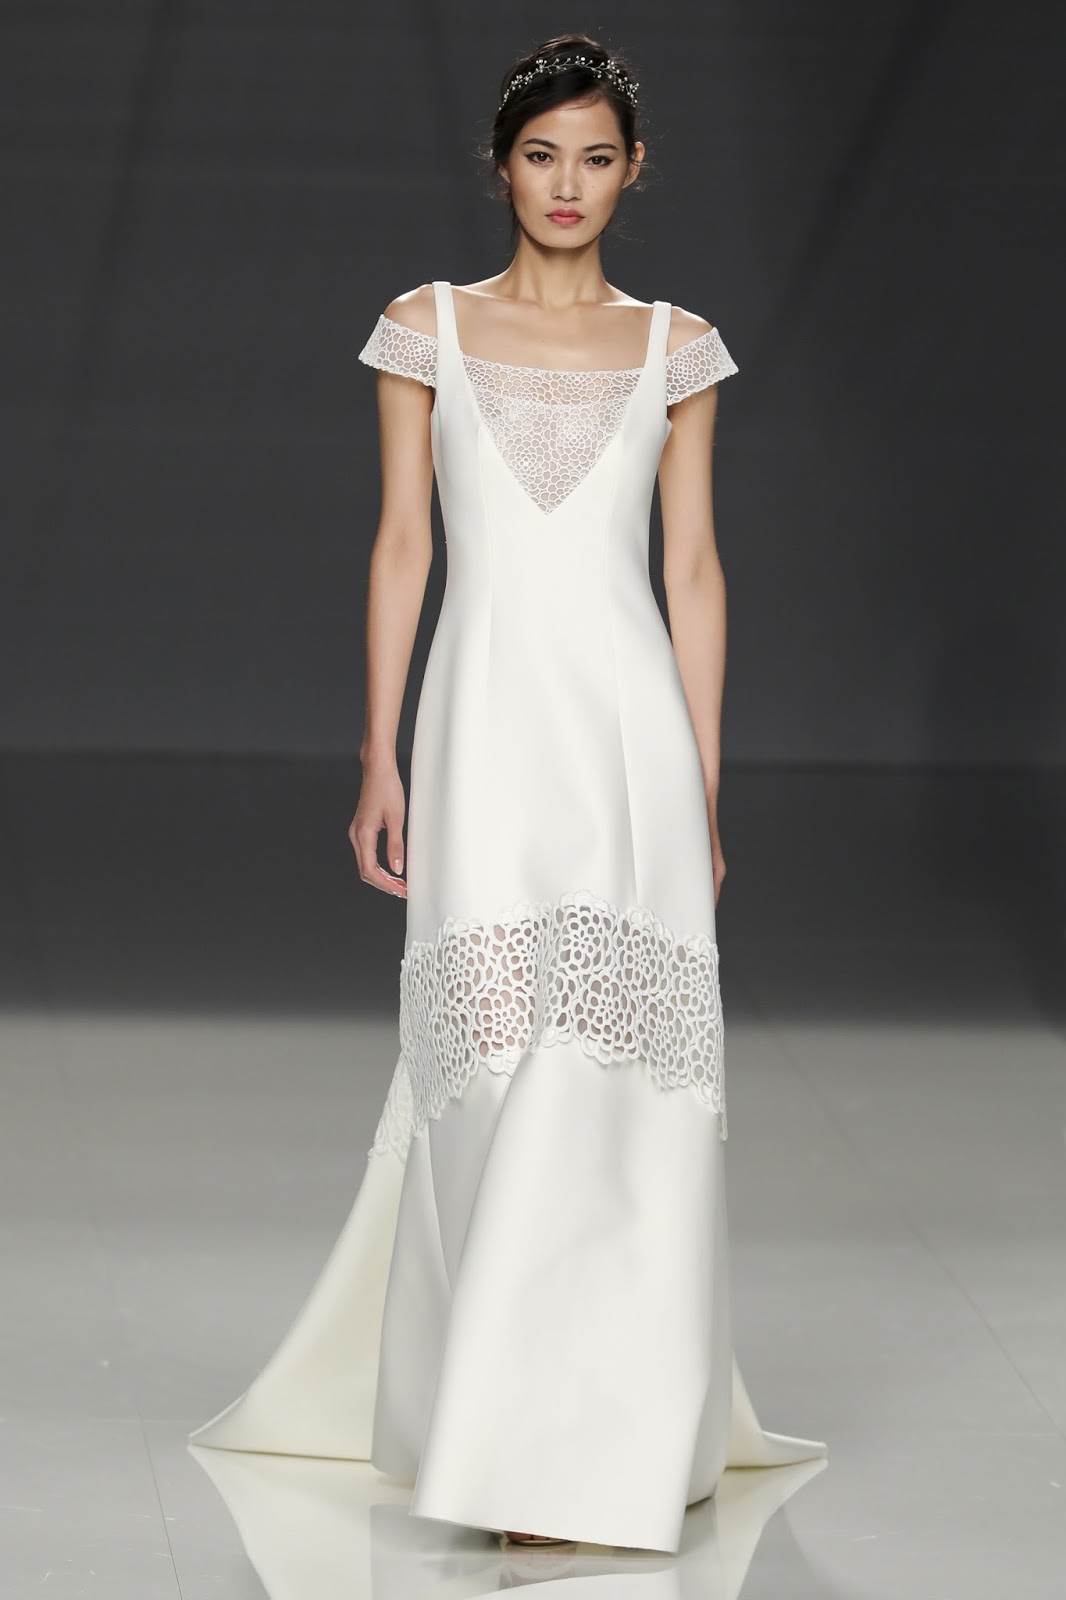 Not your FIRST Wedding? Perhaps a GOWN for you.